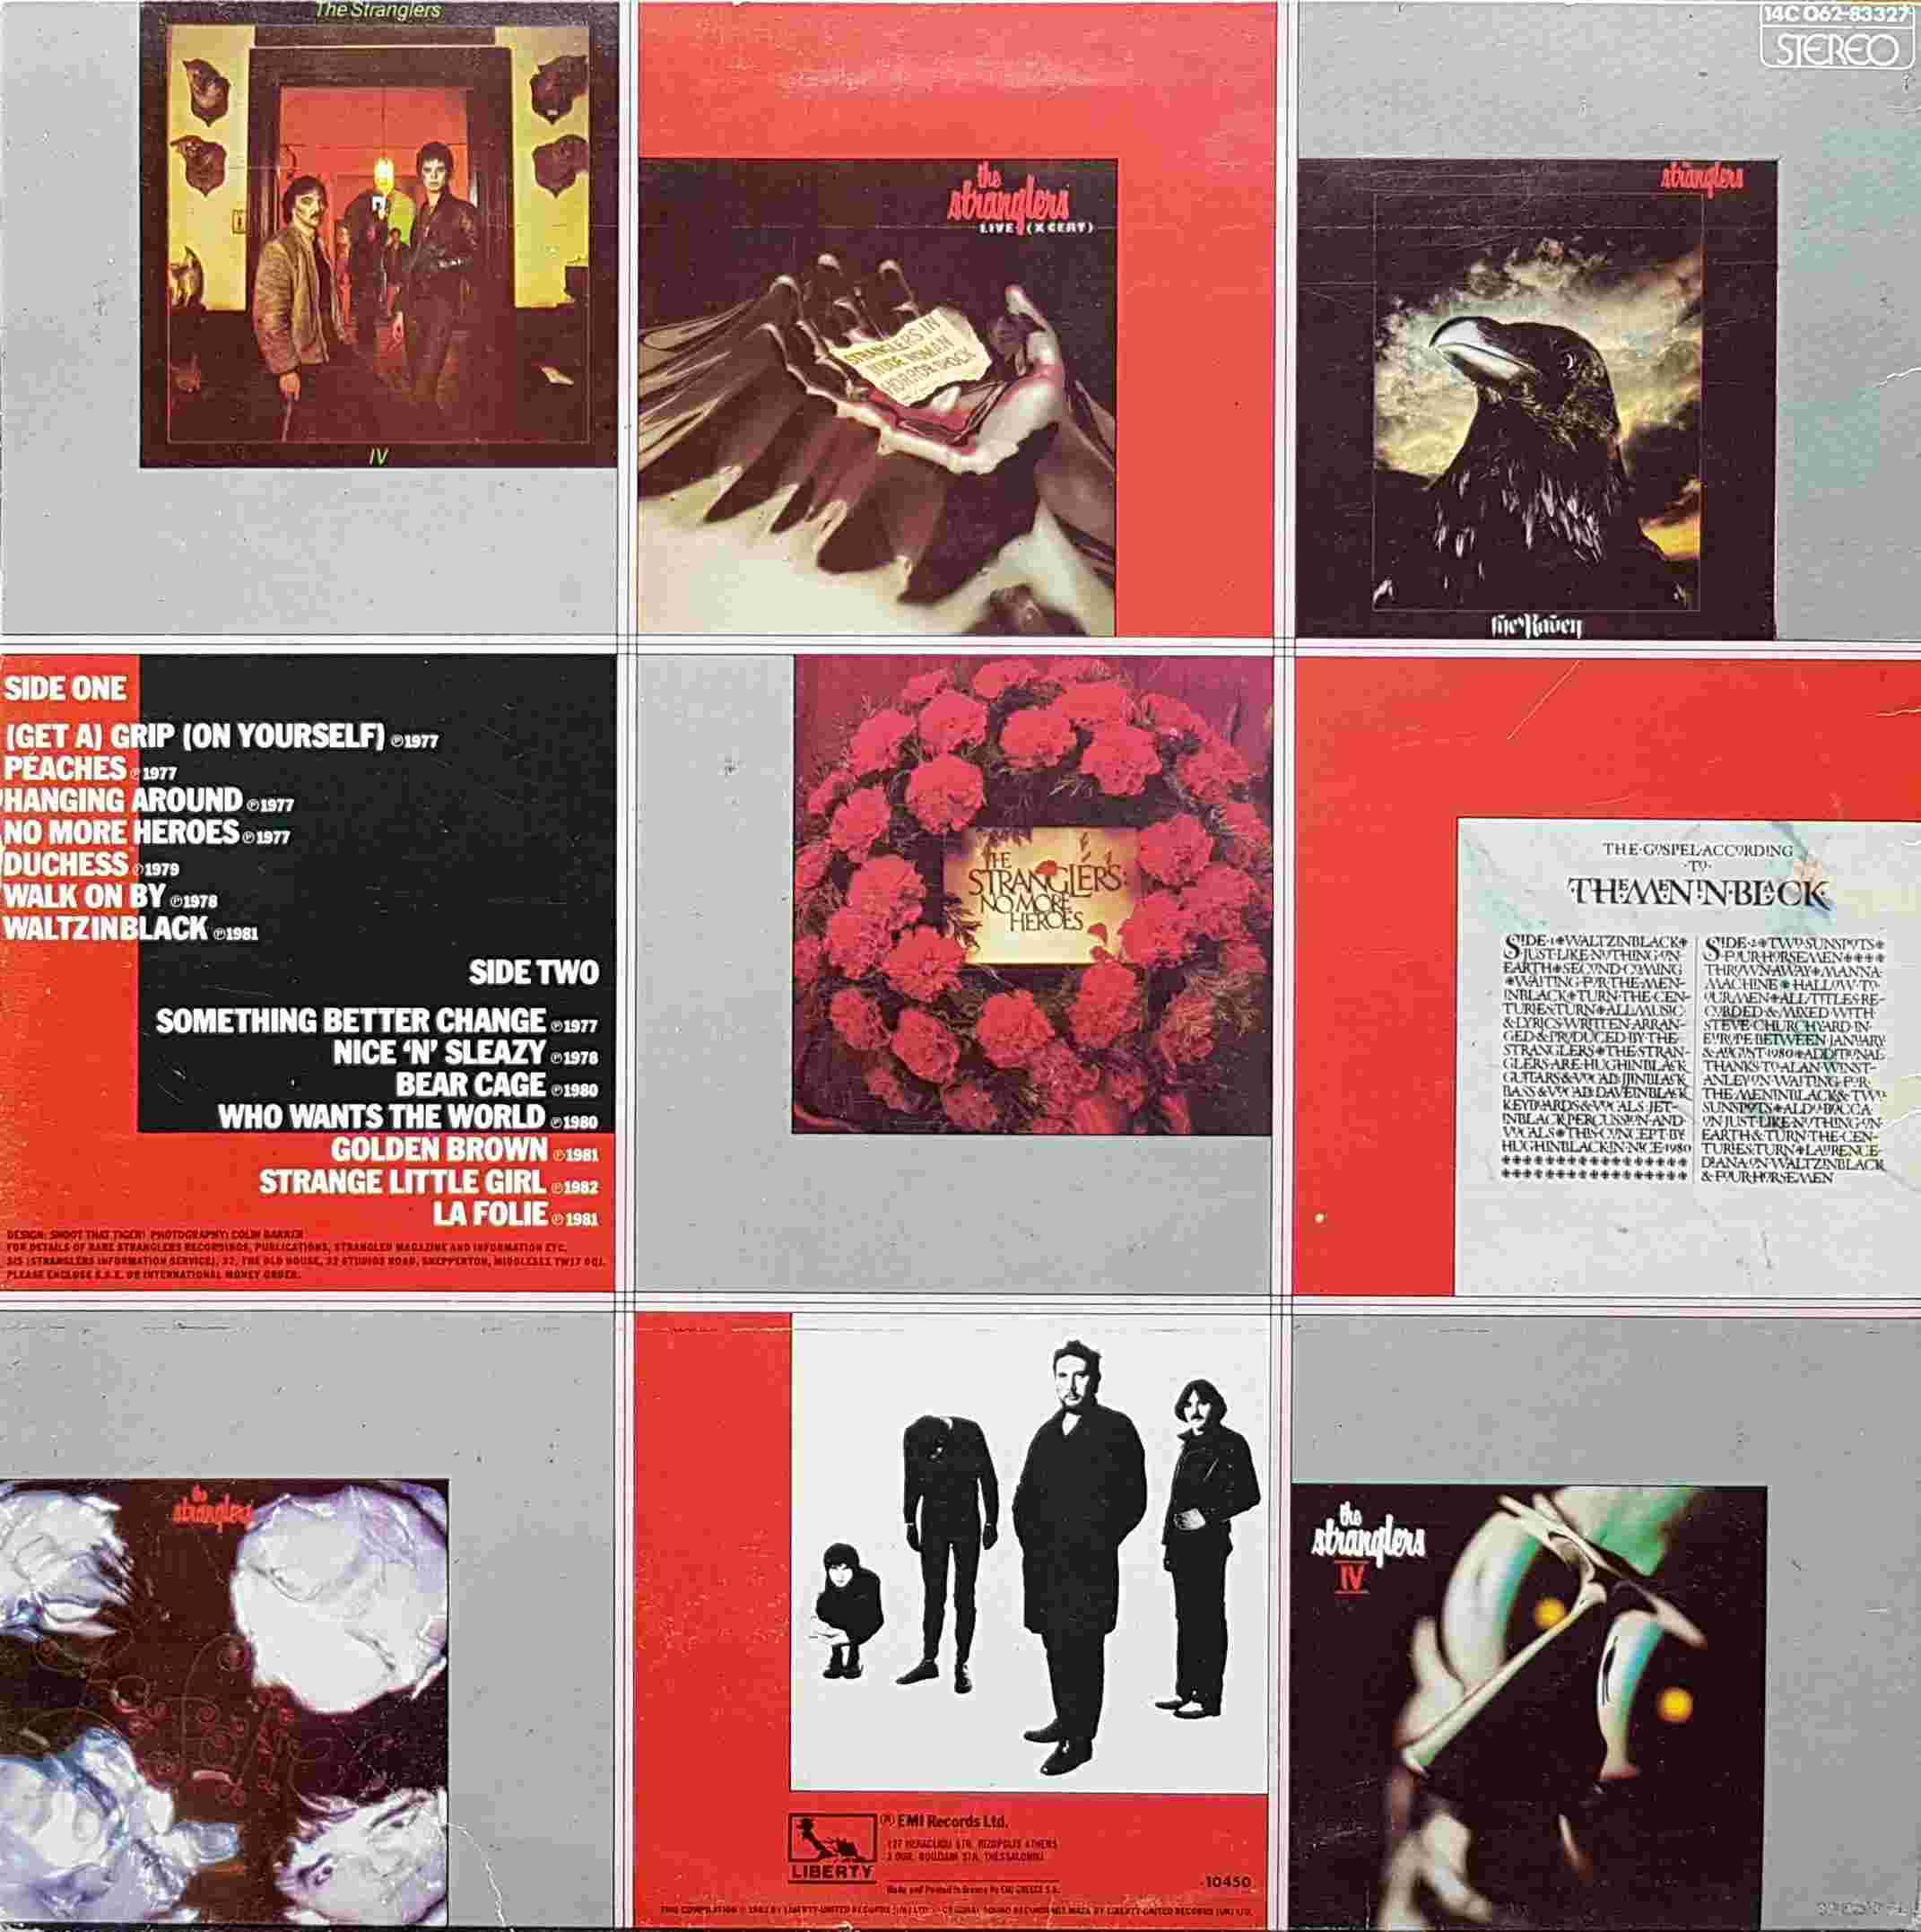 Picture of 14C 062 - 83327 The collection 1977 - 1982 by artist The Stranglers  from The Stranglers